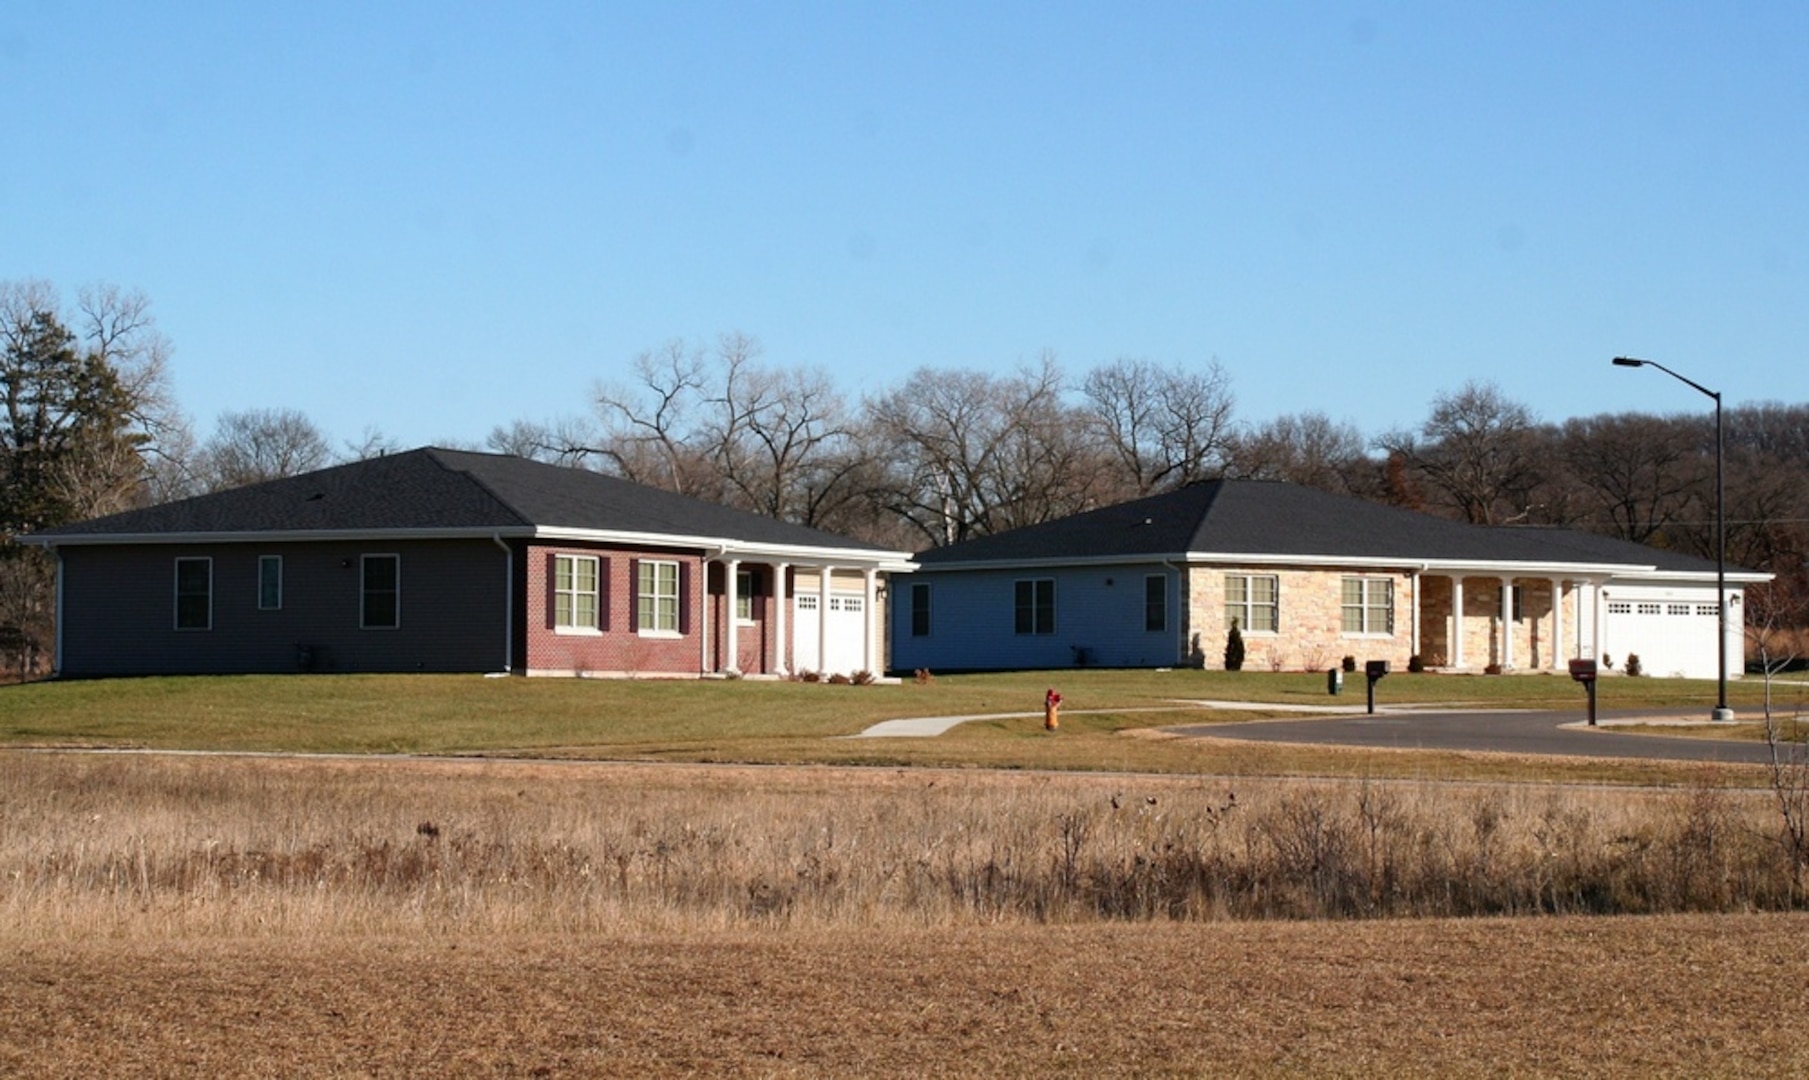 A home is shown Dec. 4, 2020, at the South Post Family Housing area at Fort McCoy, Wis. Twenty-two homes are officer homes (nine three-bedroom and 13 four-bedroom), and 91 are enlisted homes (55 three-bedroom and 36 four-bedroom). The area doubled in size in 2017 after the completion of 57 new homes. Another seven homes are nearly complete in the area. The housing area is managed by the Fort McCoy Directorate of Public Works Housing Division. (U.S. Army Photo by Scott T. Sturkol, Public Affairs Office, Fort McCoy, Wis.)